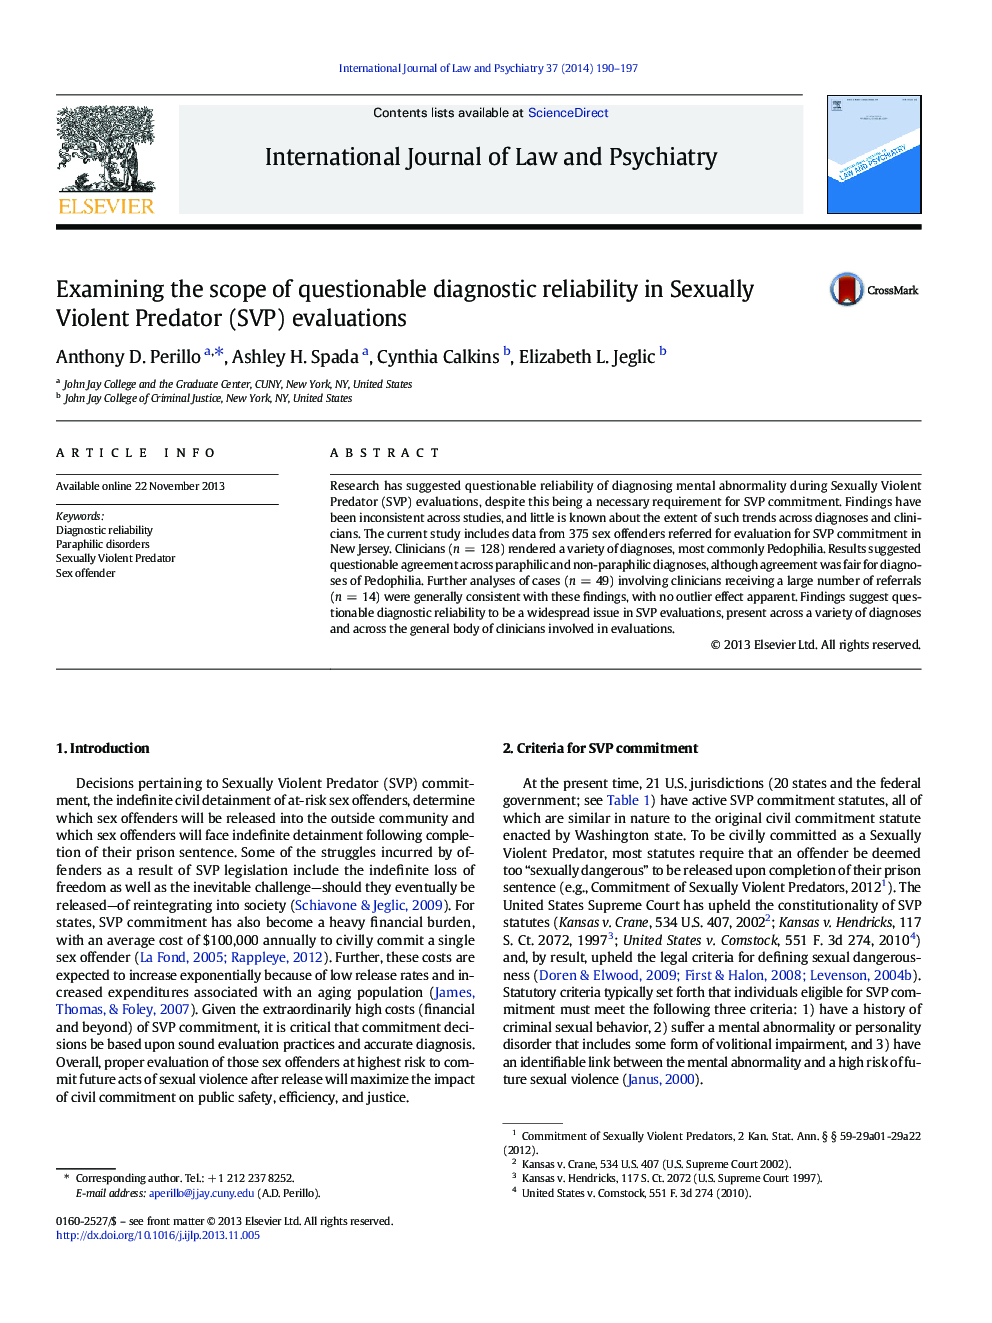 Examining the scope of questionable diagnostic reliability in Sexually Violent Predator (SVP) evaluations